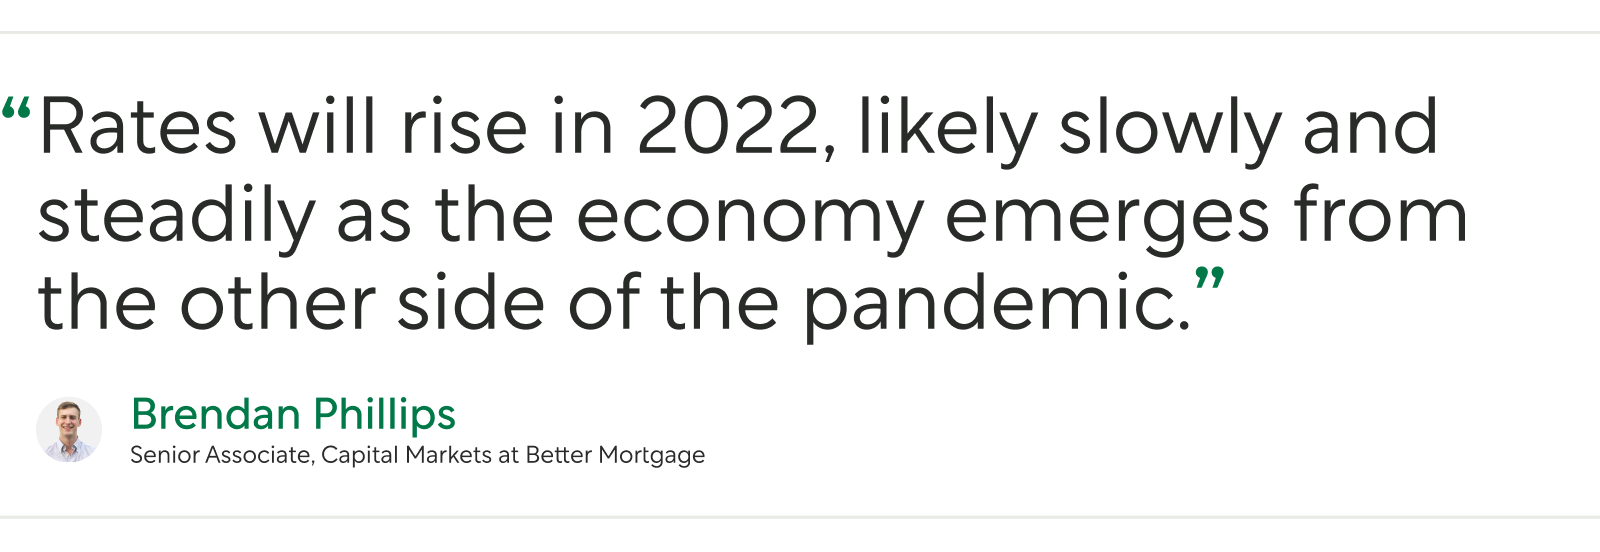 "Pull Quote From Senior Associate of Capital Markets at Better Mortgage Brendan Phillips: “Rates will rise in 2022, likely slowly and steadily as the economy emerges from the other side of the pandemic.”